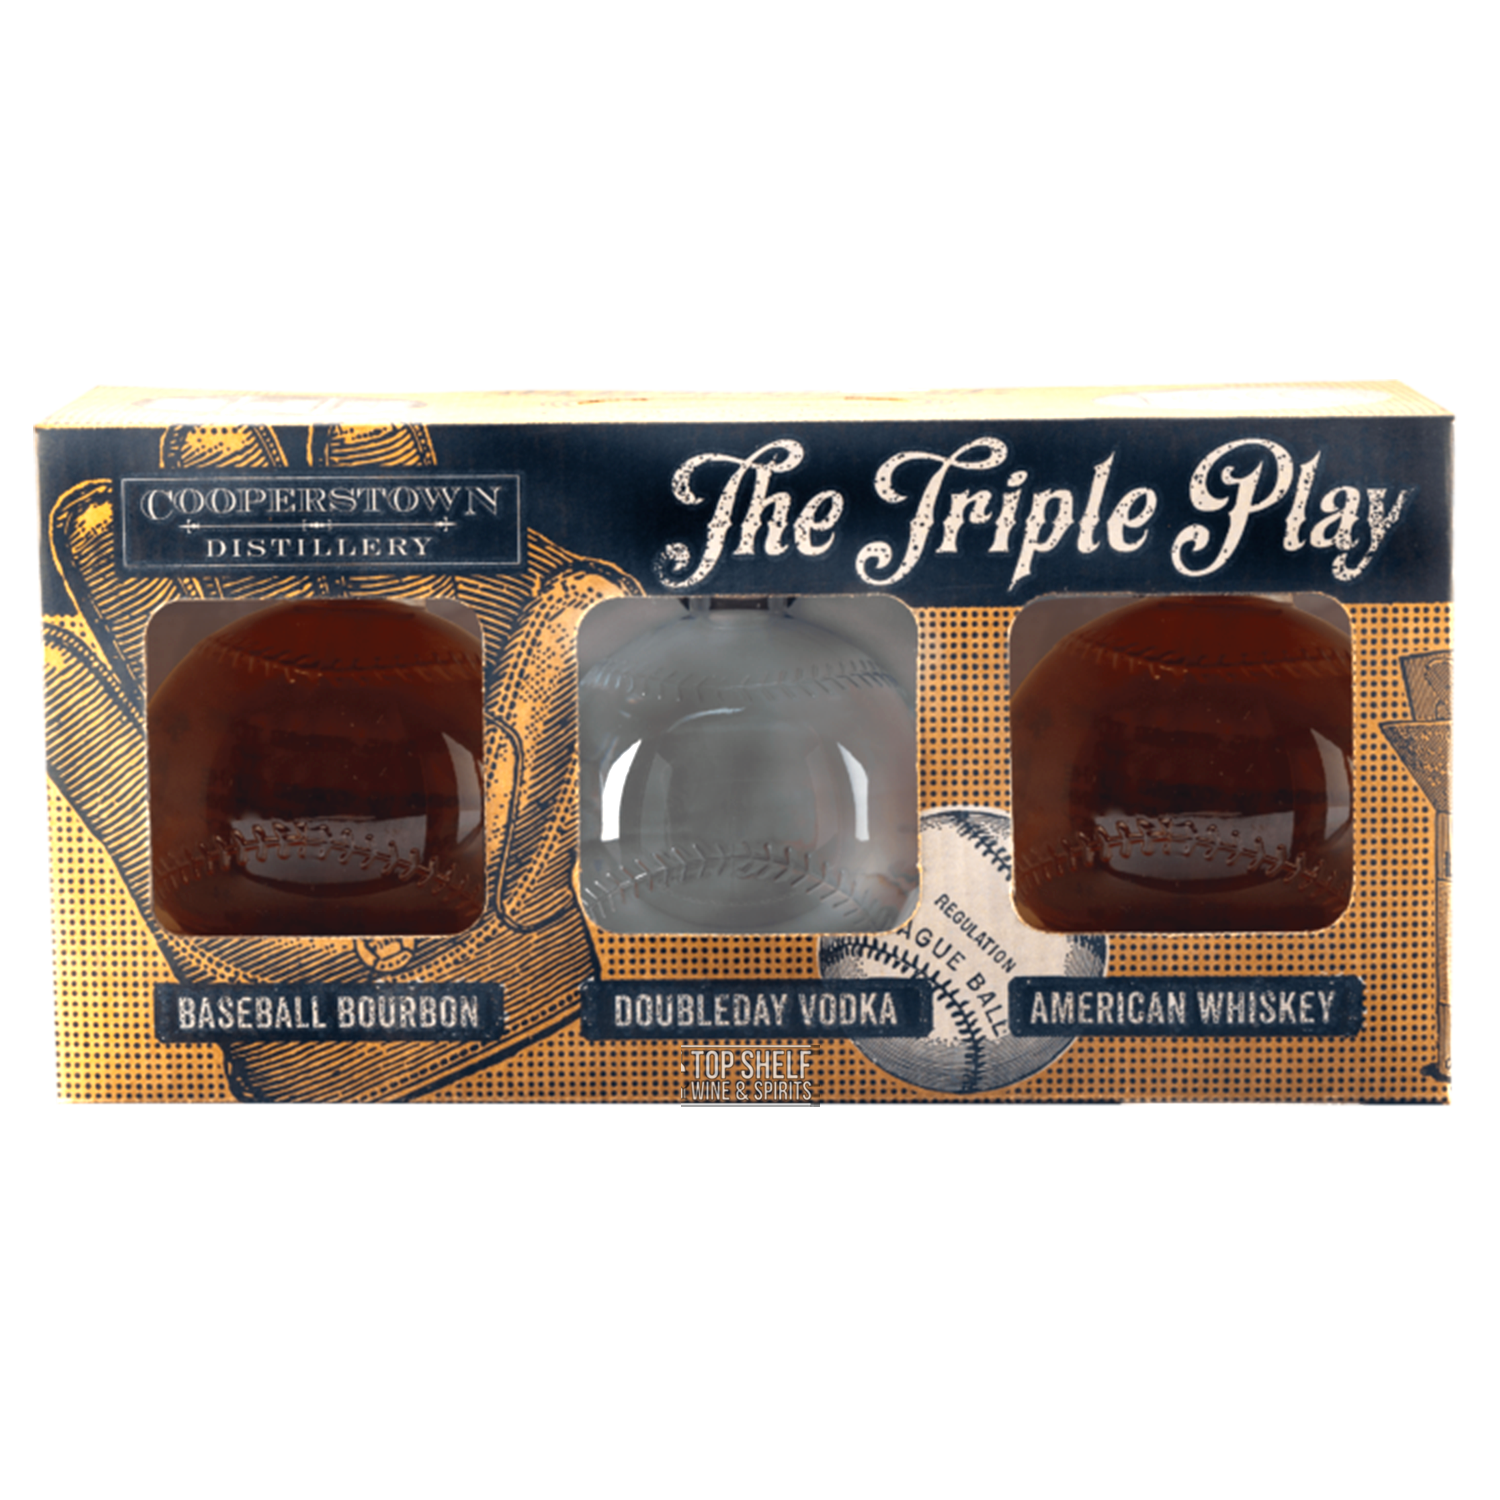 Cooperstown The Triple Play in Baseball Bottles (3 pack of 750mL)